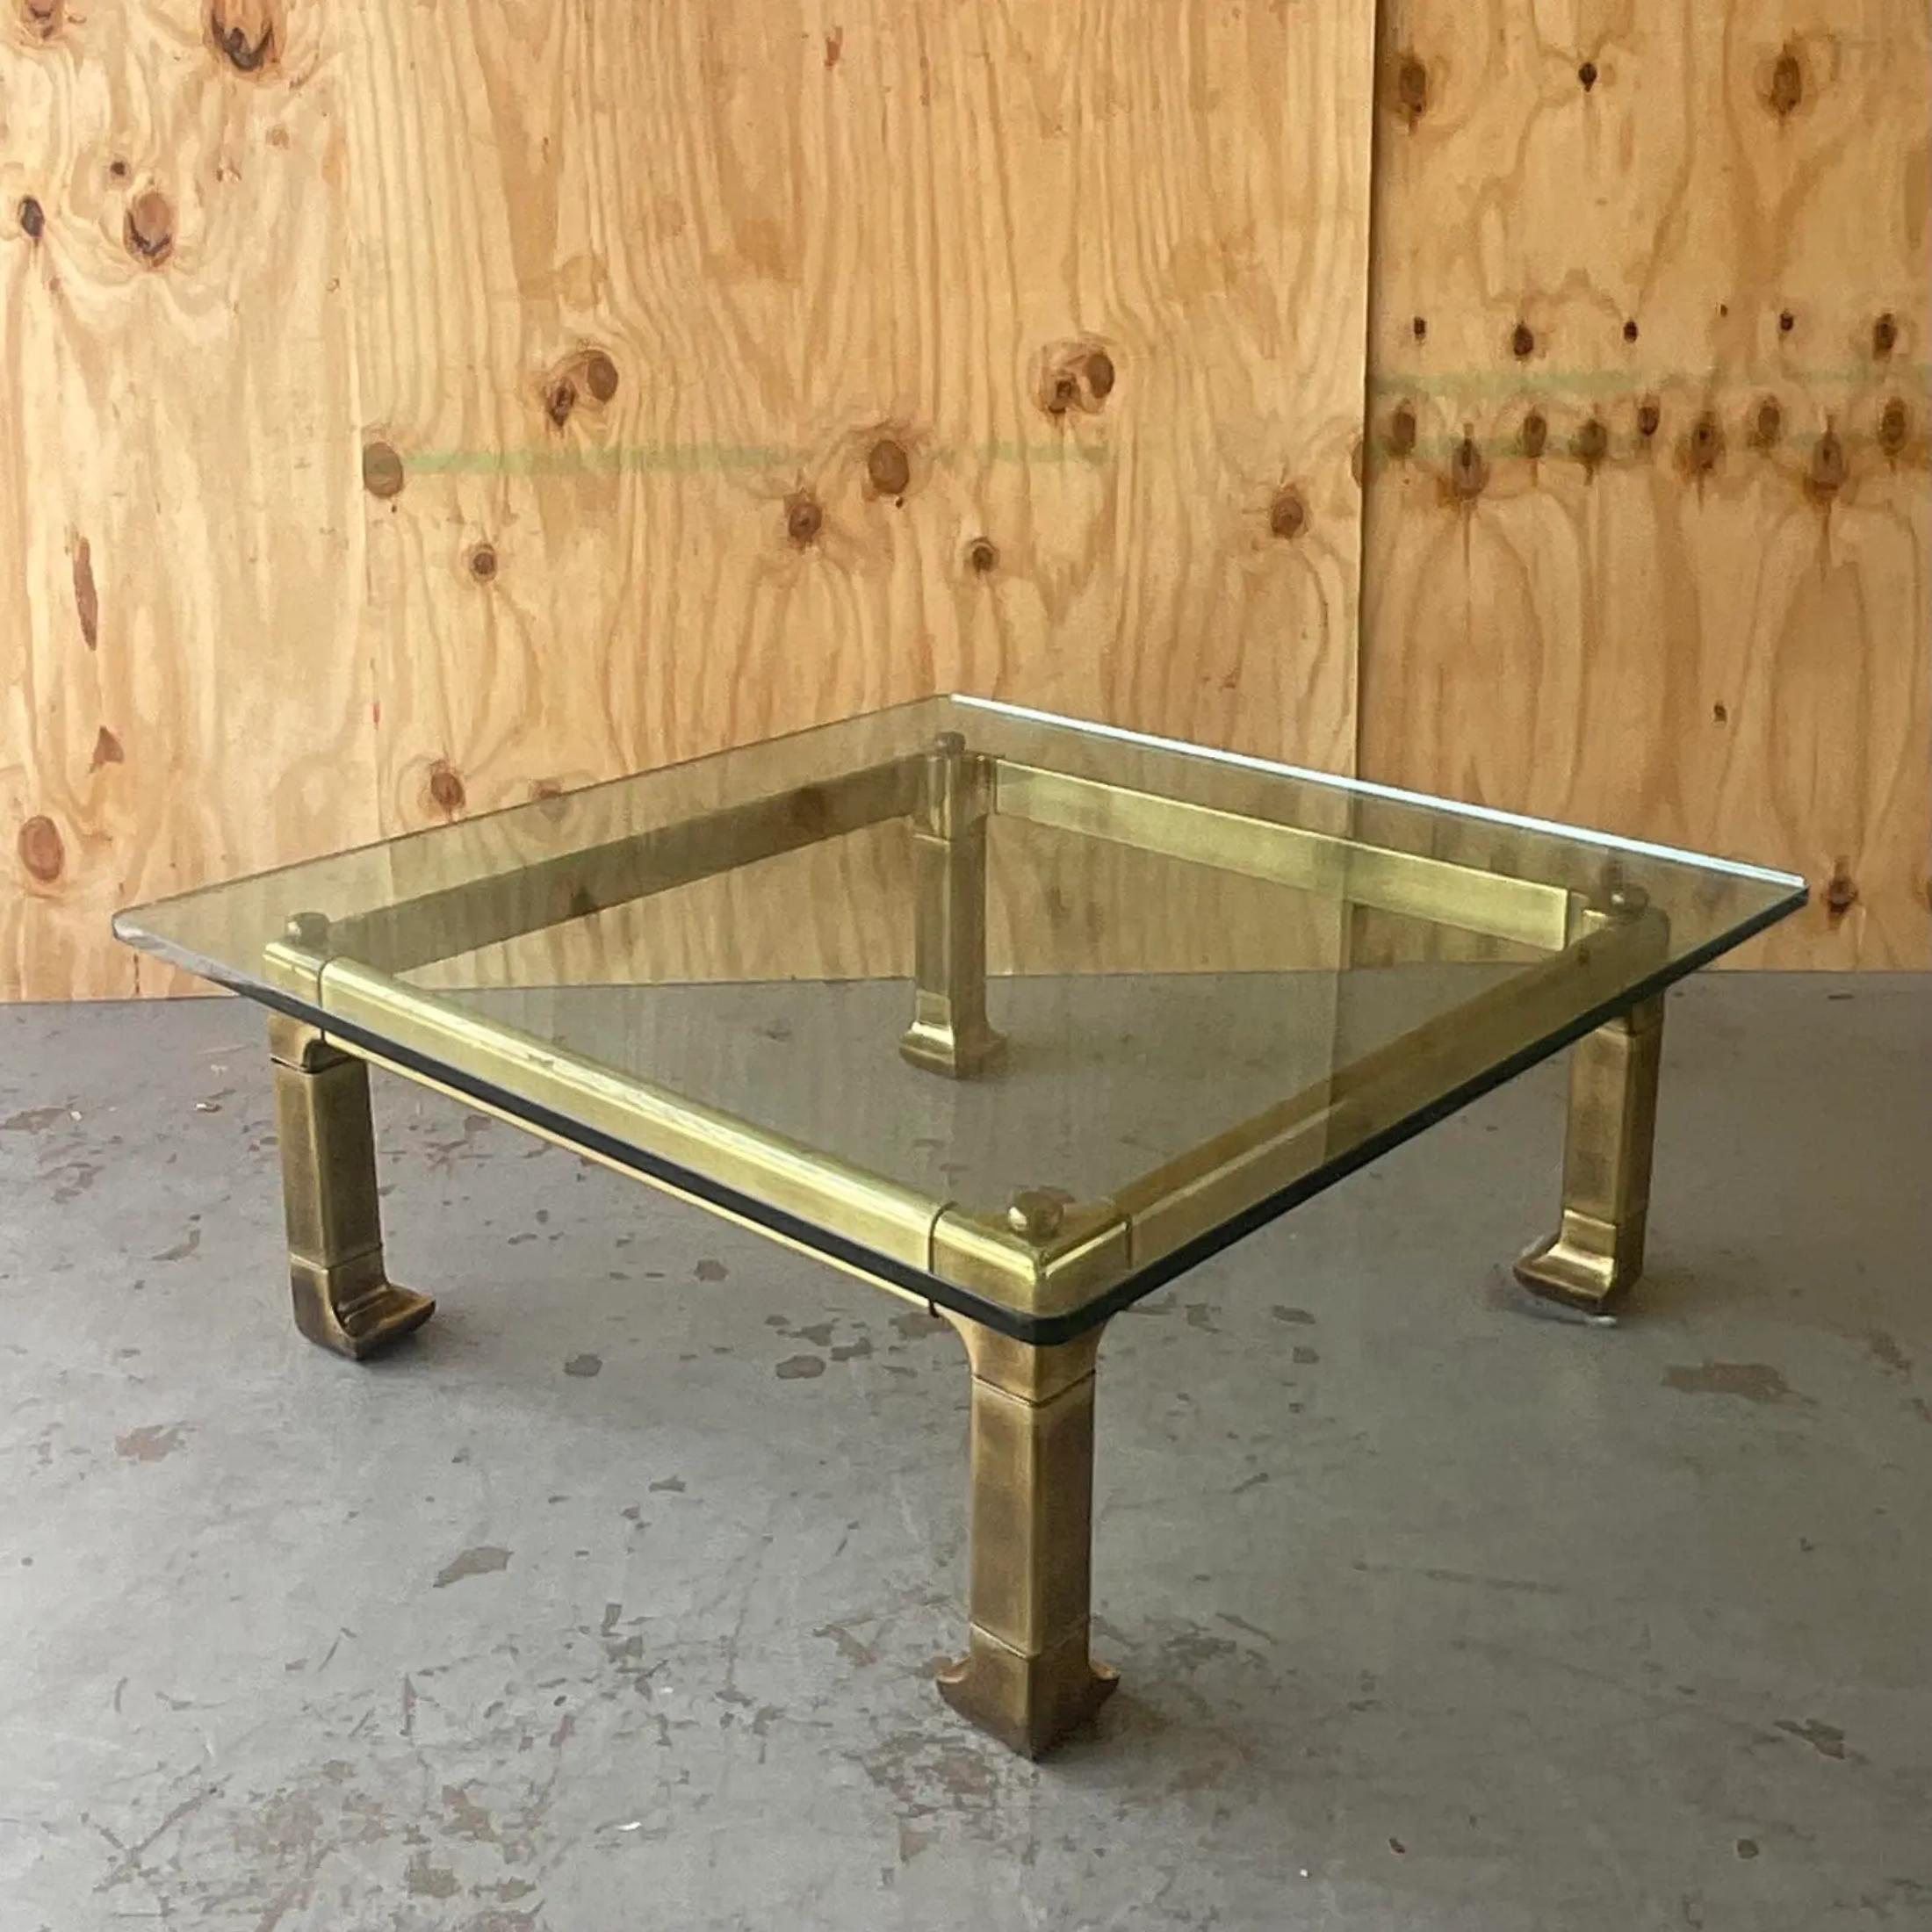 Late 20th Century Vintage Regency Brass Coffee Table After Mastercraft In Good Condition For Sale In west palm beach, FL